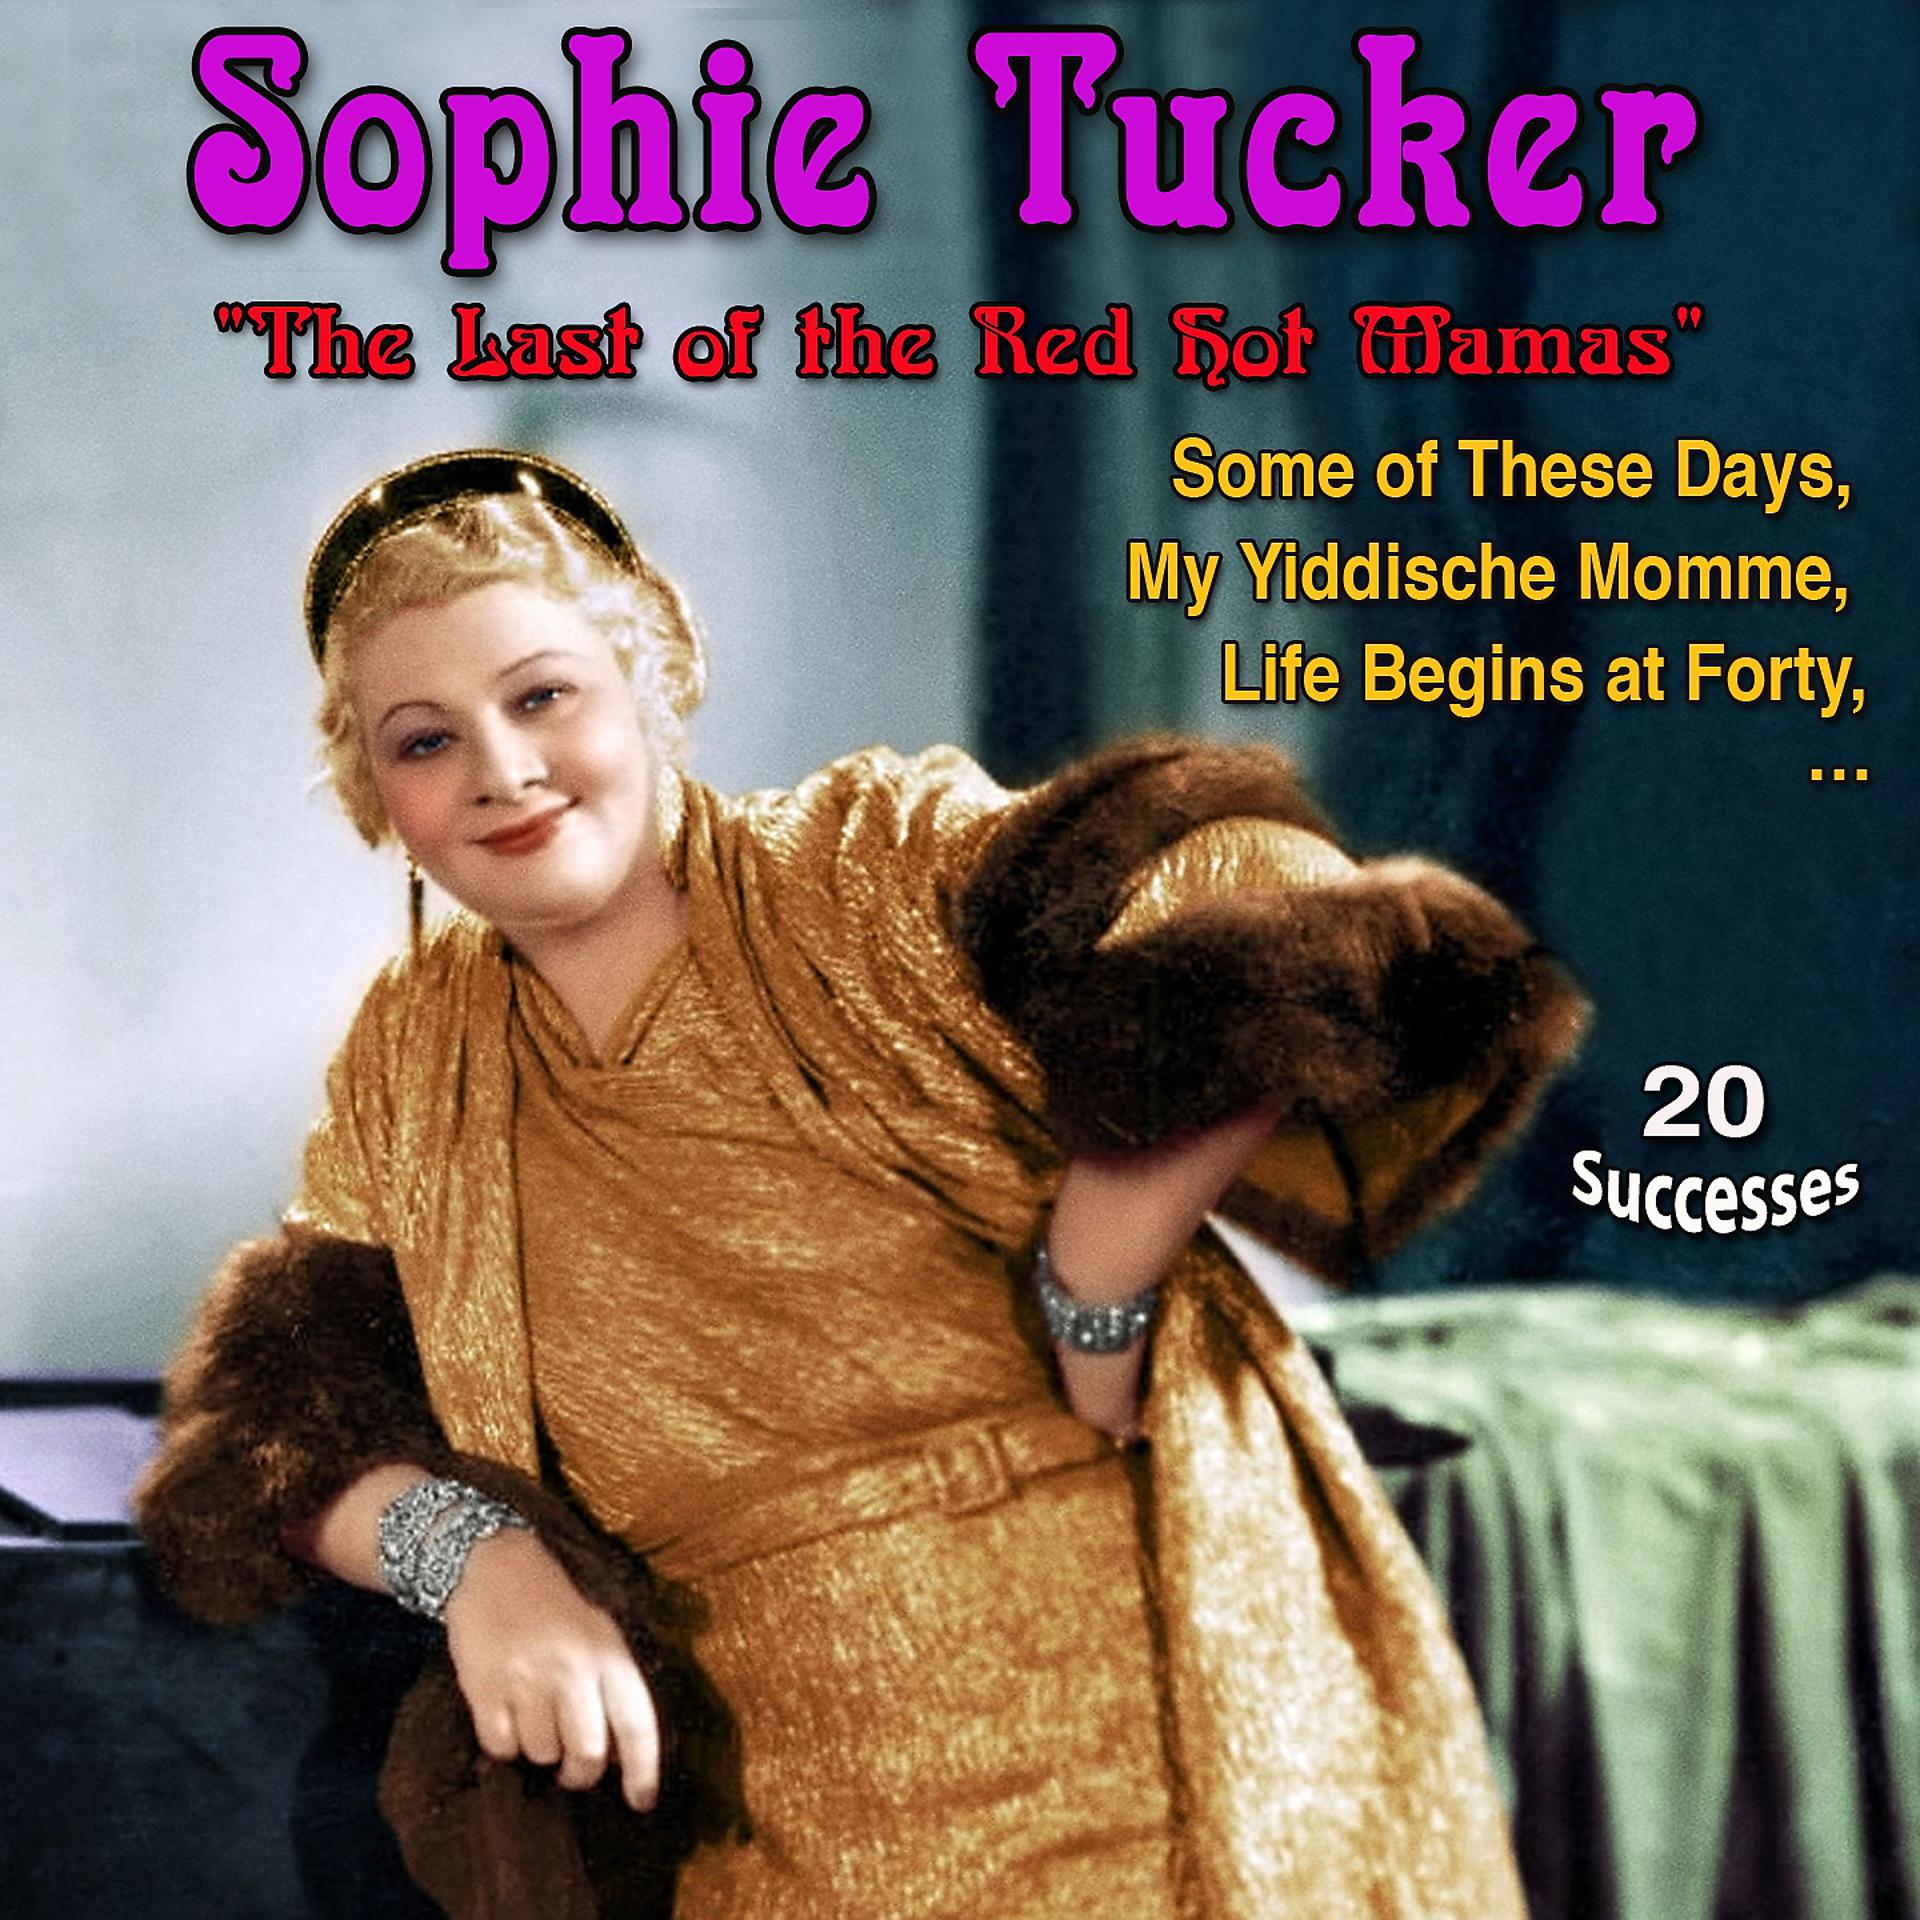 Постер альбома Sophie Tucker - "The Last of the Red Hot Mamas" - My Yiddische Momme